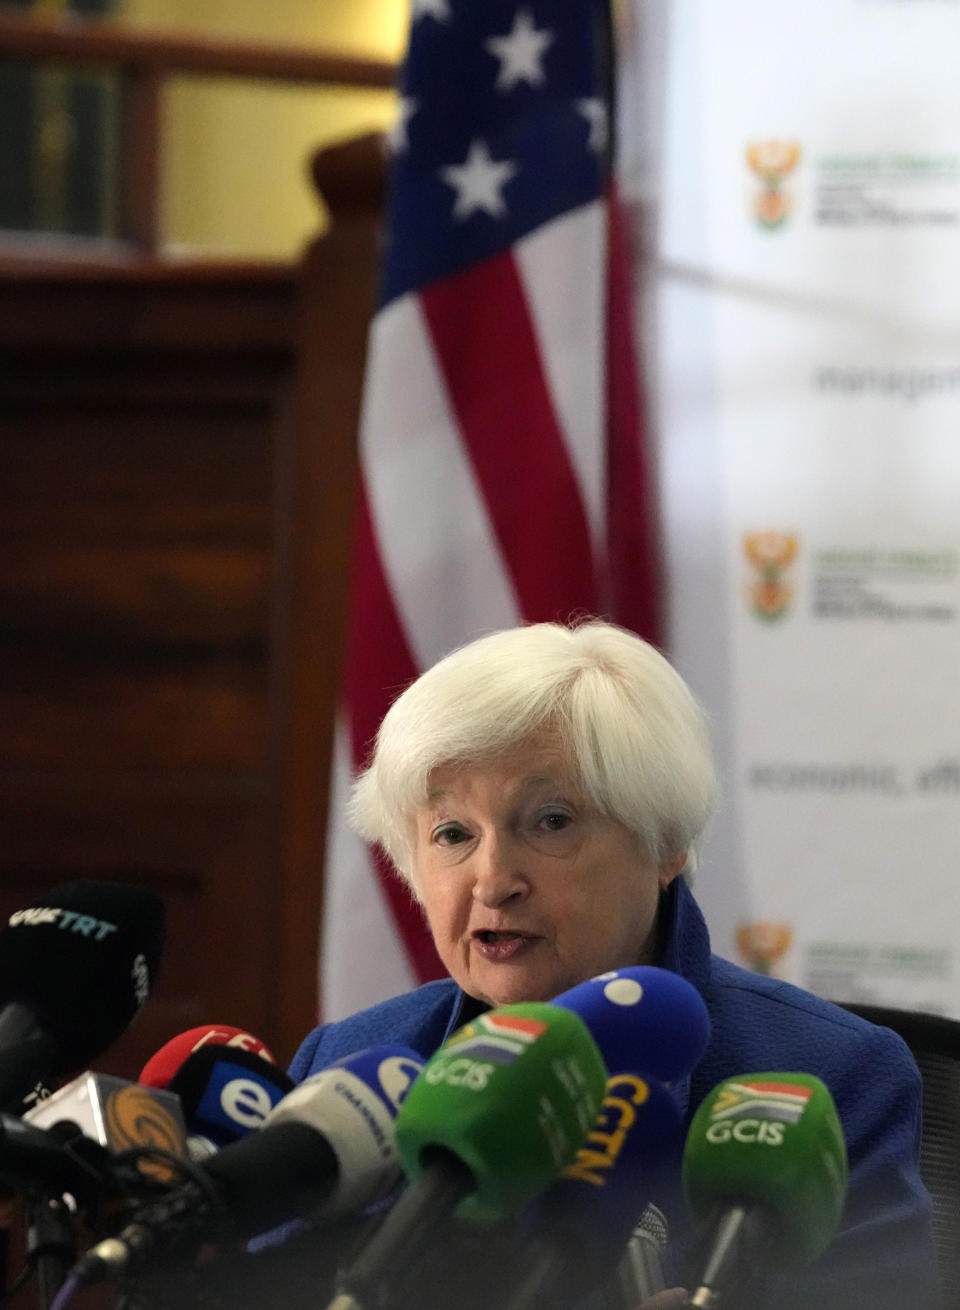 U.S. Treasury Secretary Janet Yellen speaks during her meeting with South Africa's Minister of Finance Enoch Godongwana at the National Treasury in Pretoria, South Africa, Thursday, Jan. 26, 2023. Yellen is on a 10-day tour of Africa, part of a push by the Biden administration to engage more with the world's second-largest continent. (AP Photo/Themba Hadebe)